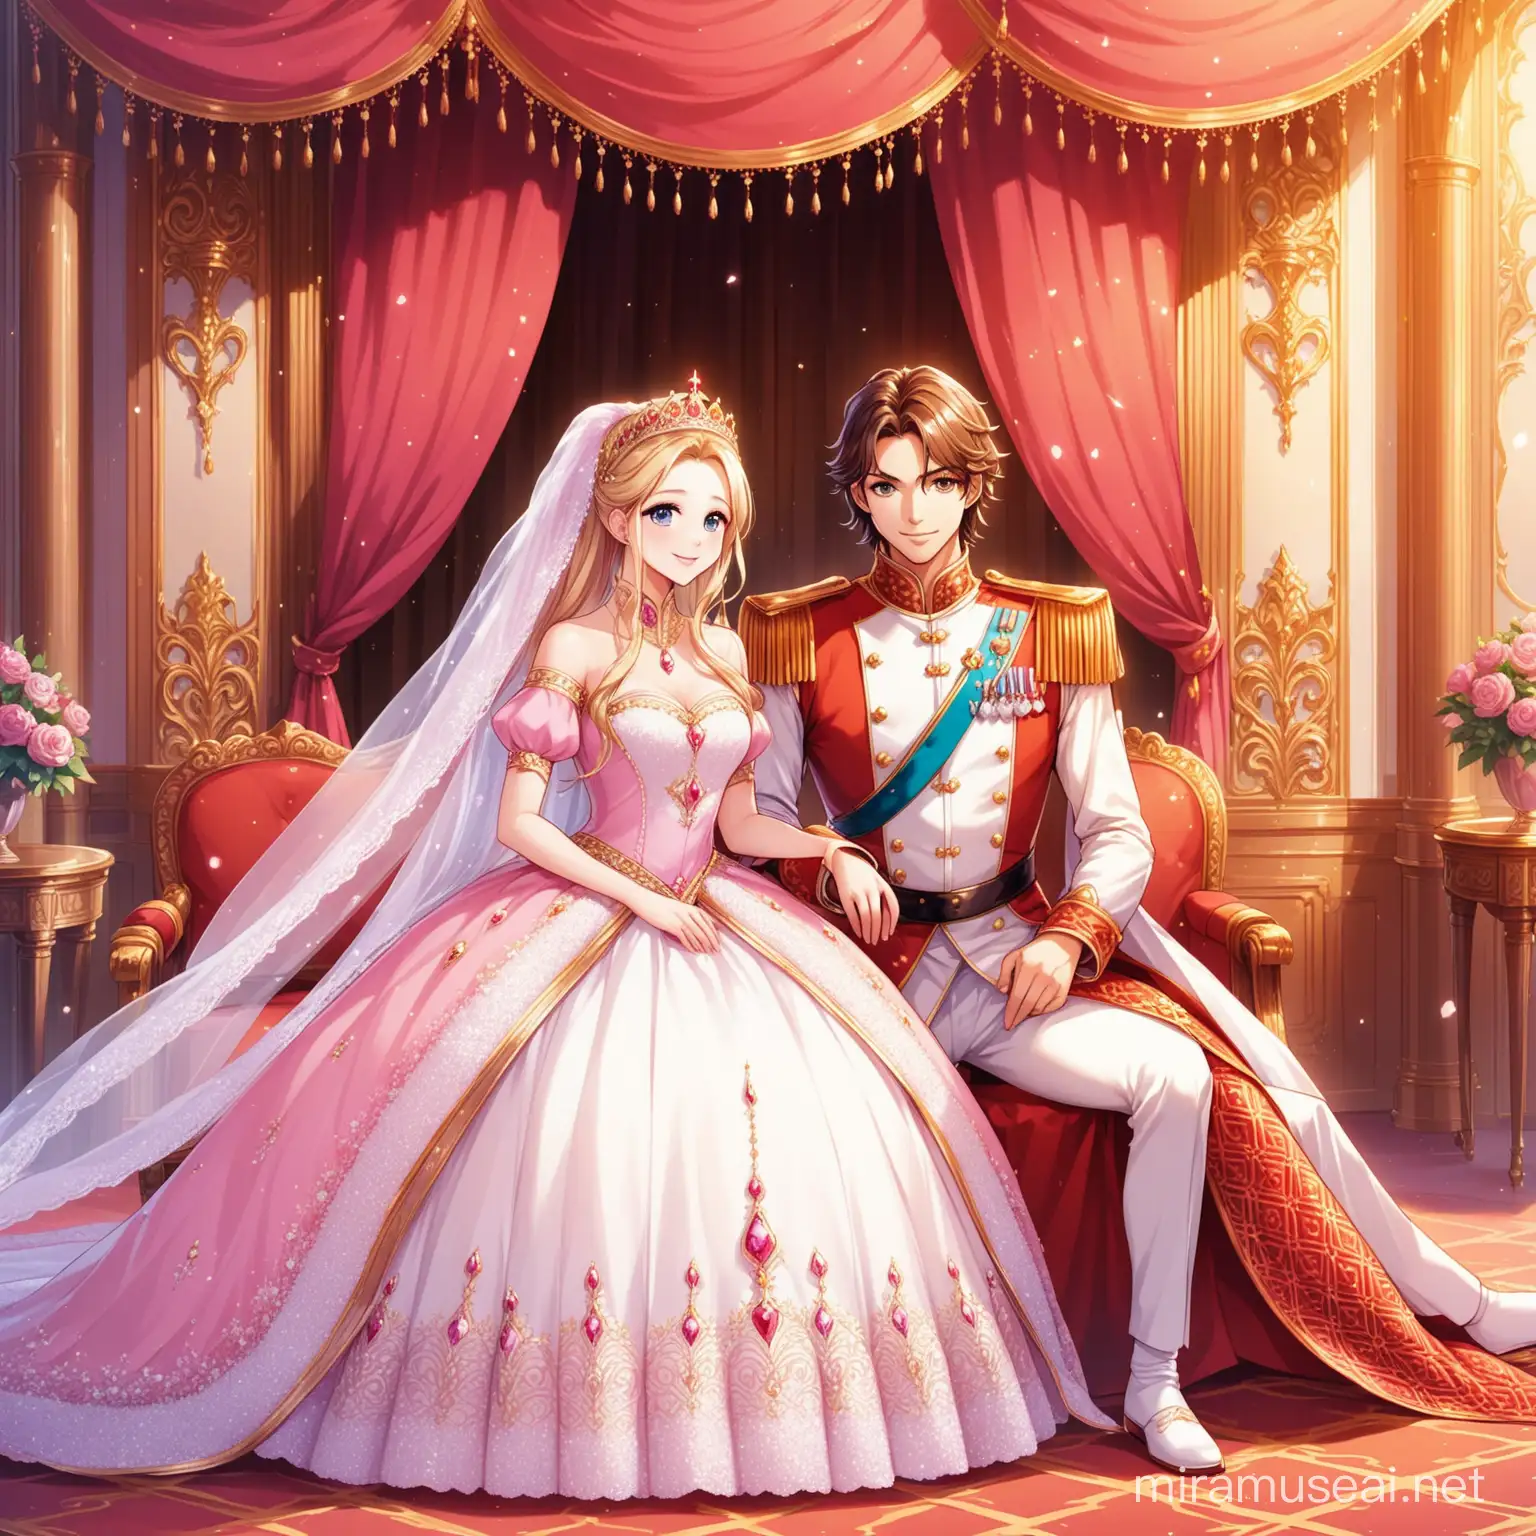 Royal Couple Embracing in Enchanted Palace of Love